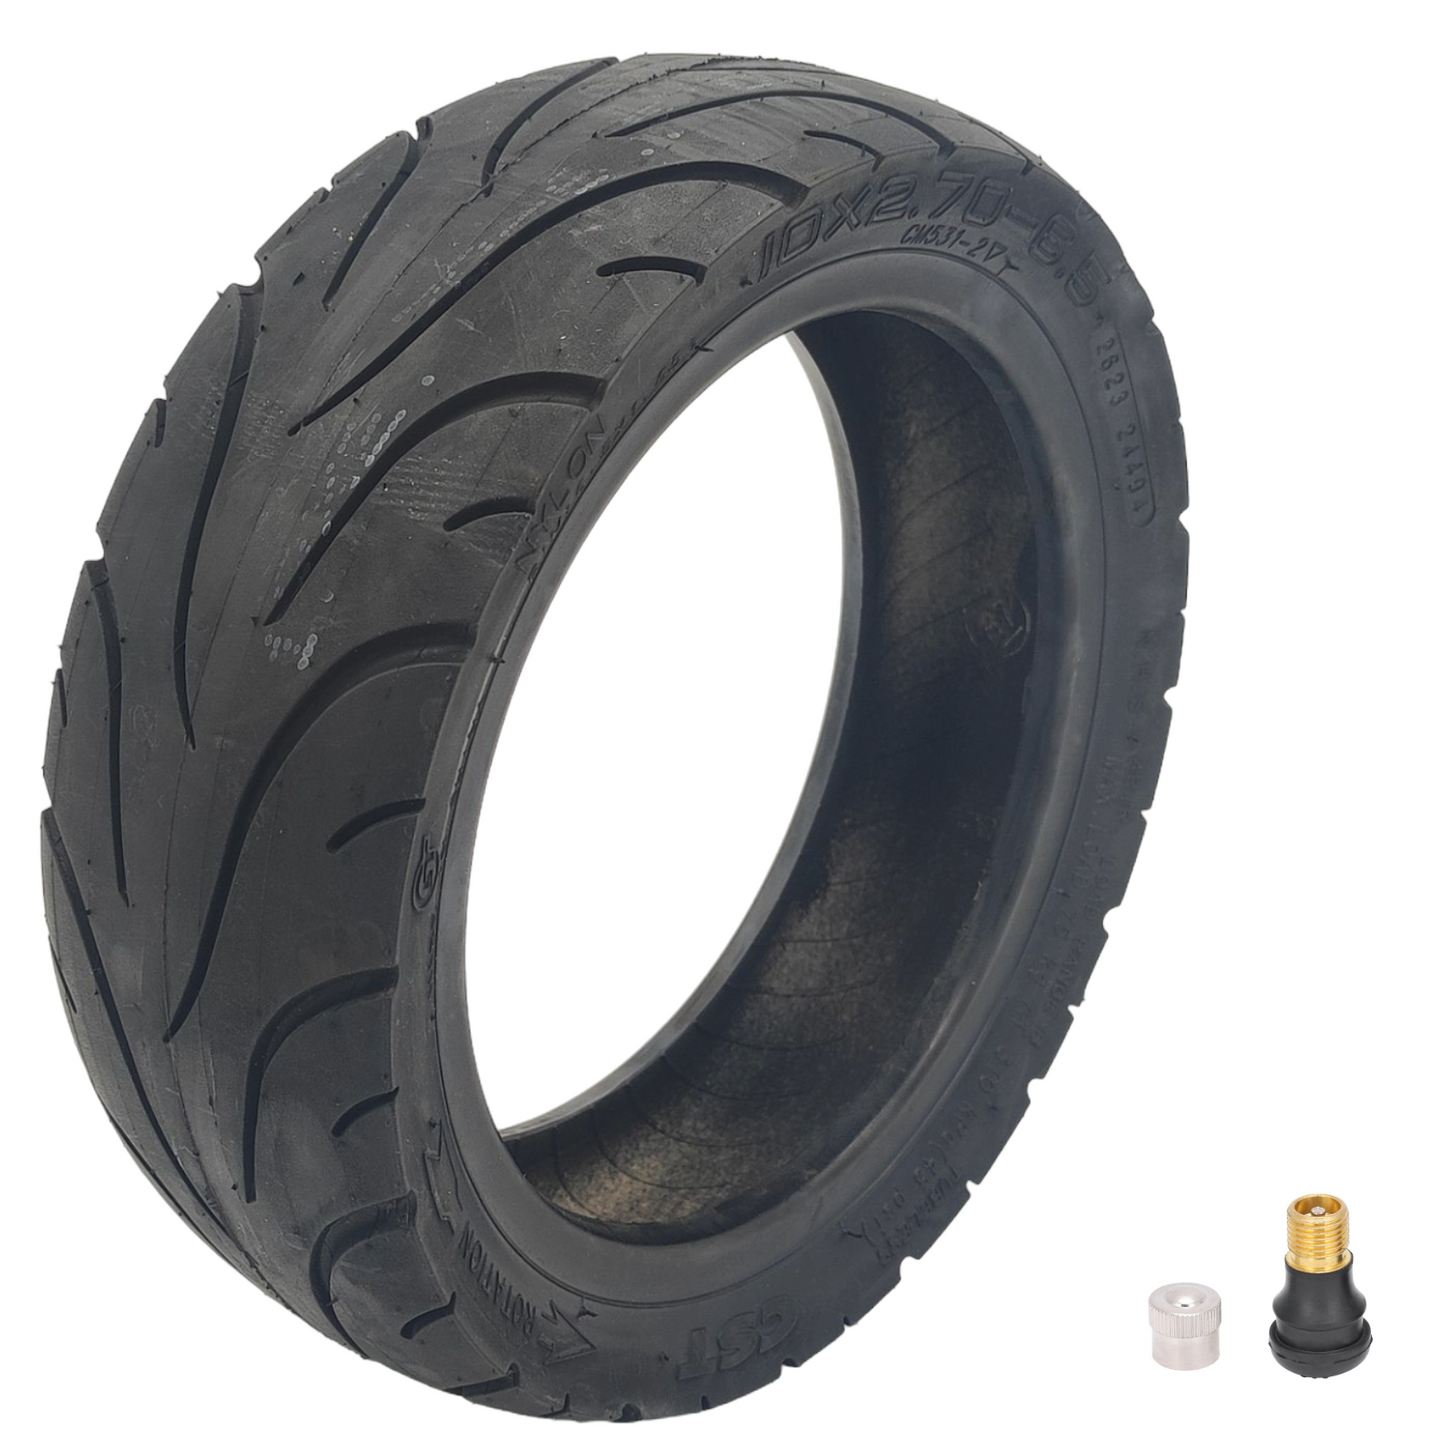 CST tire 10x2.7-6.5 tubeless without gel layer with valve